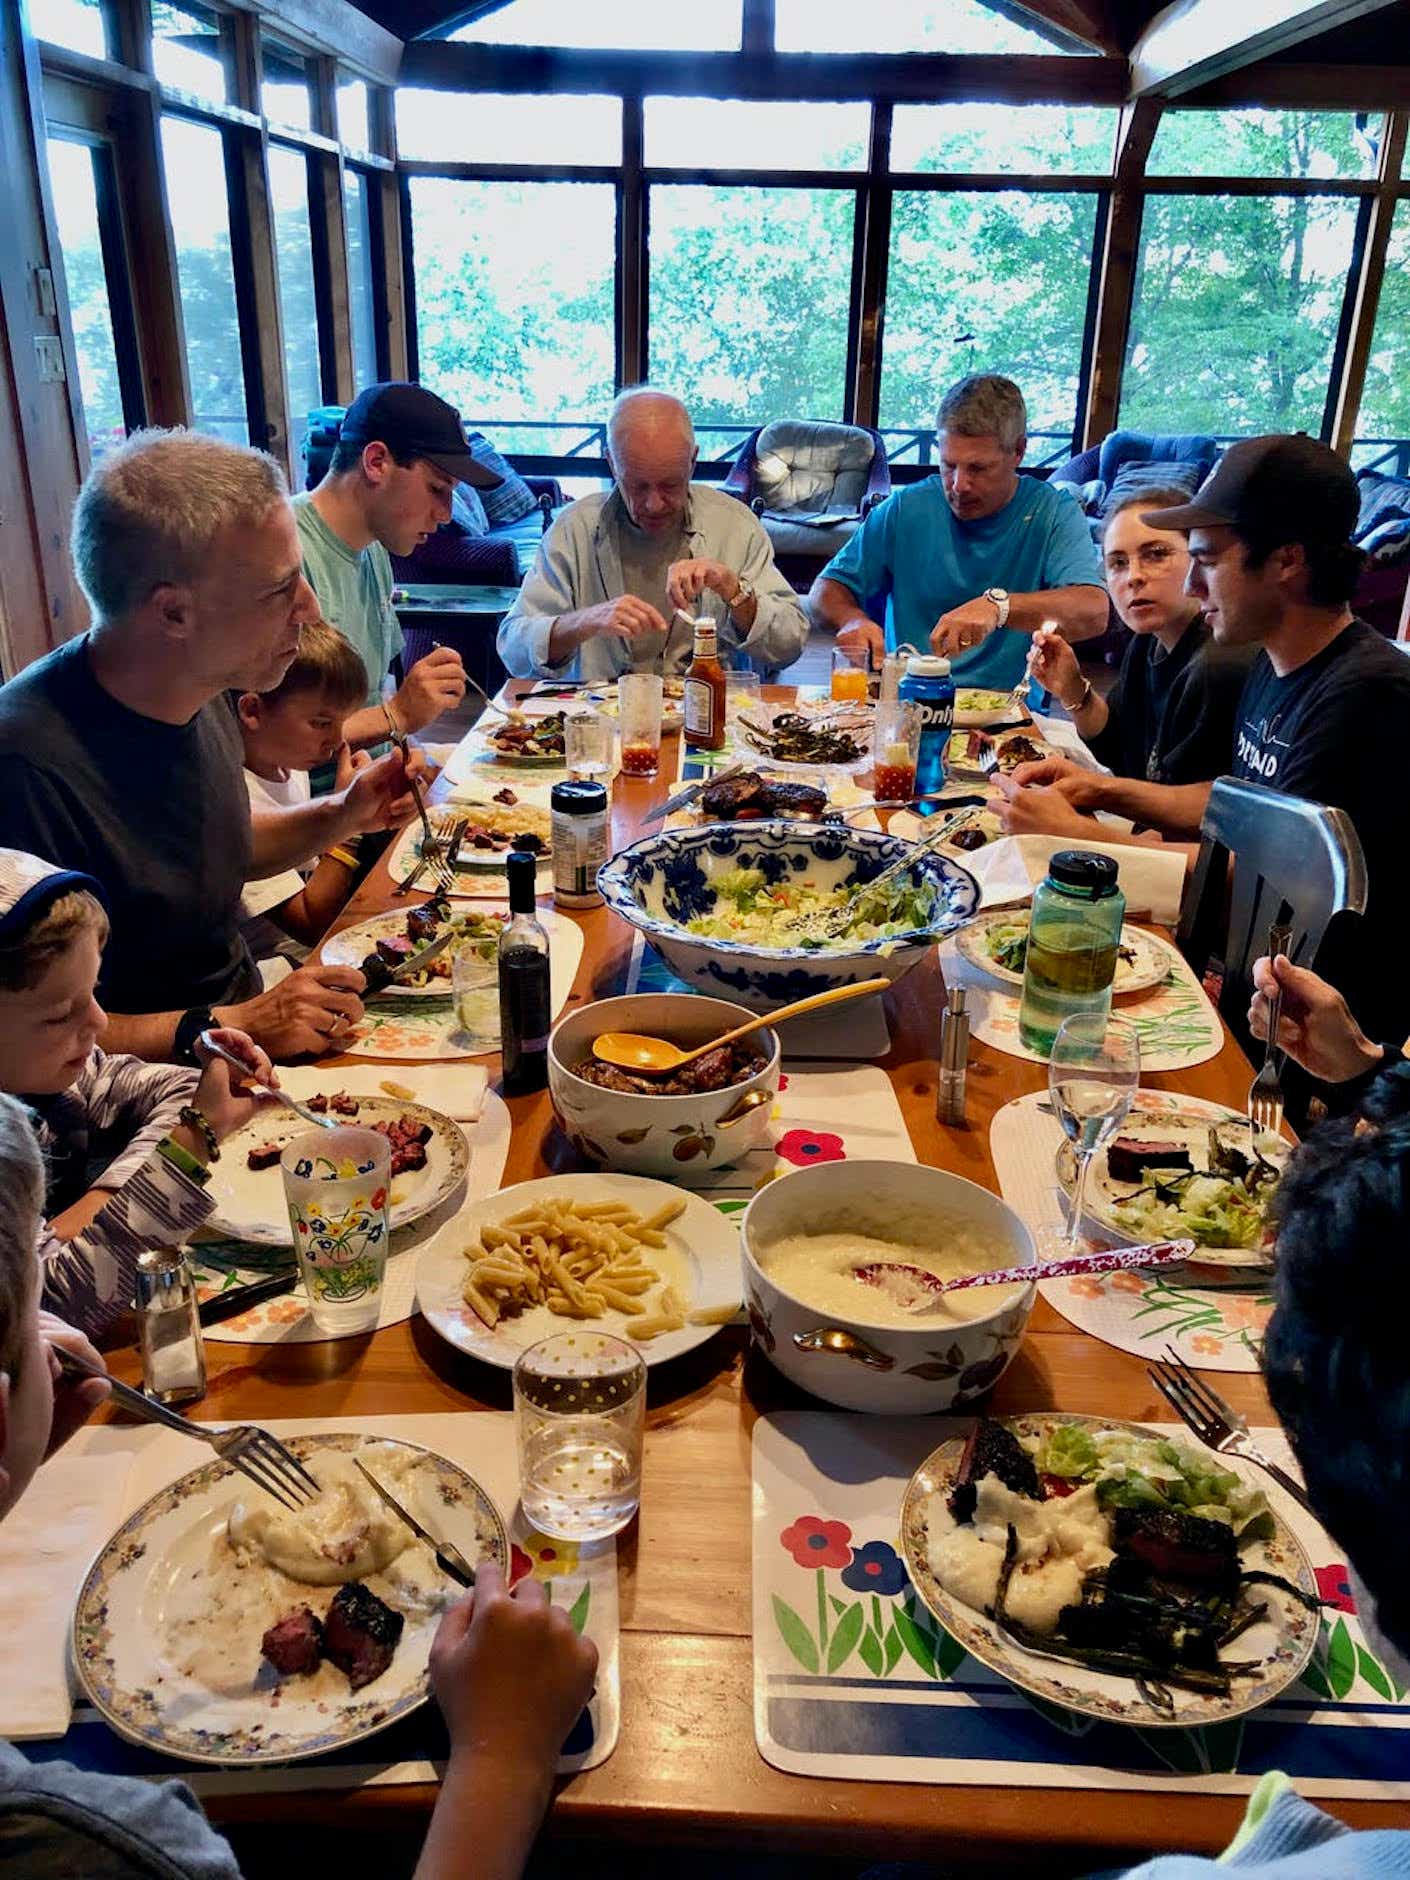 The Mondry family eats at a large table.